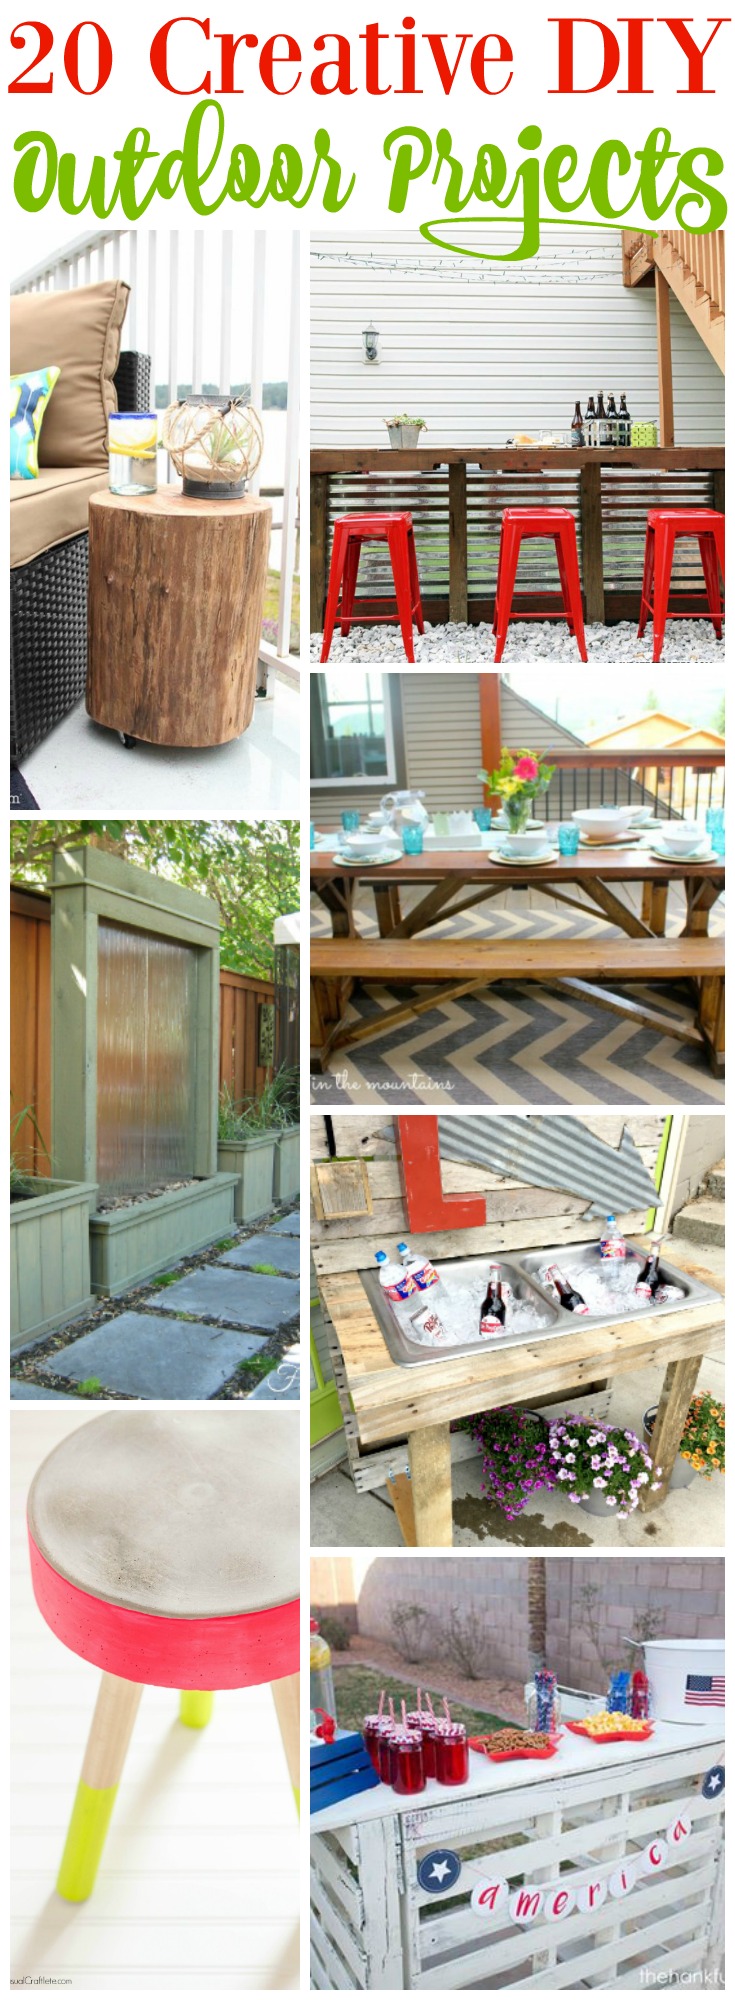 20 Creative DIY Outdoor Projects that you won't want to miss graphic.